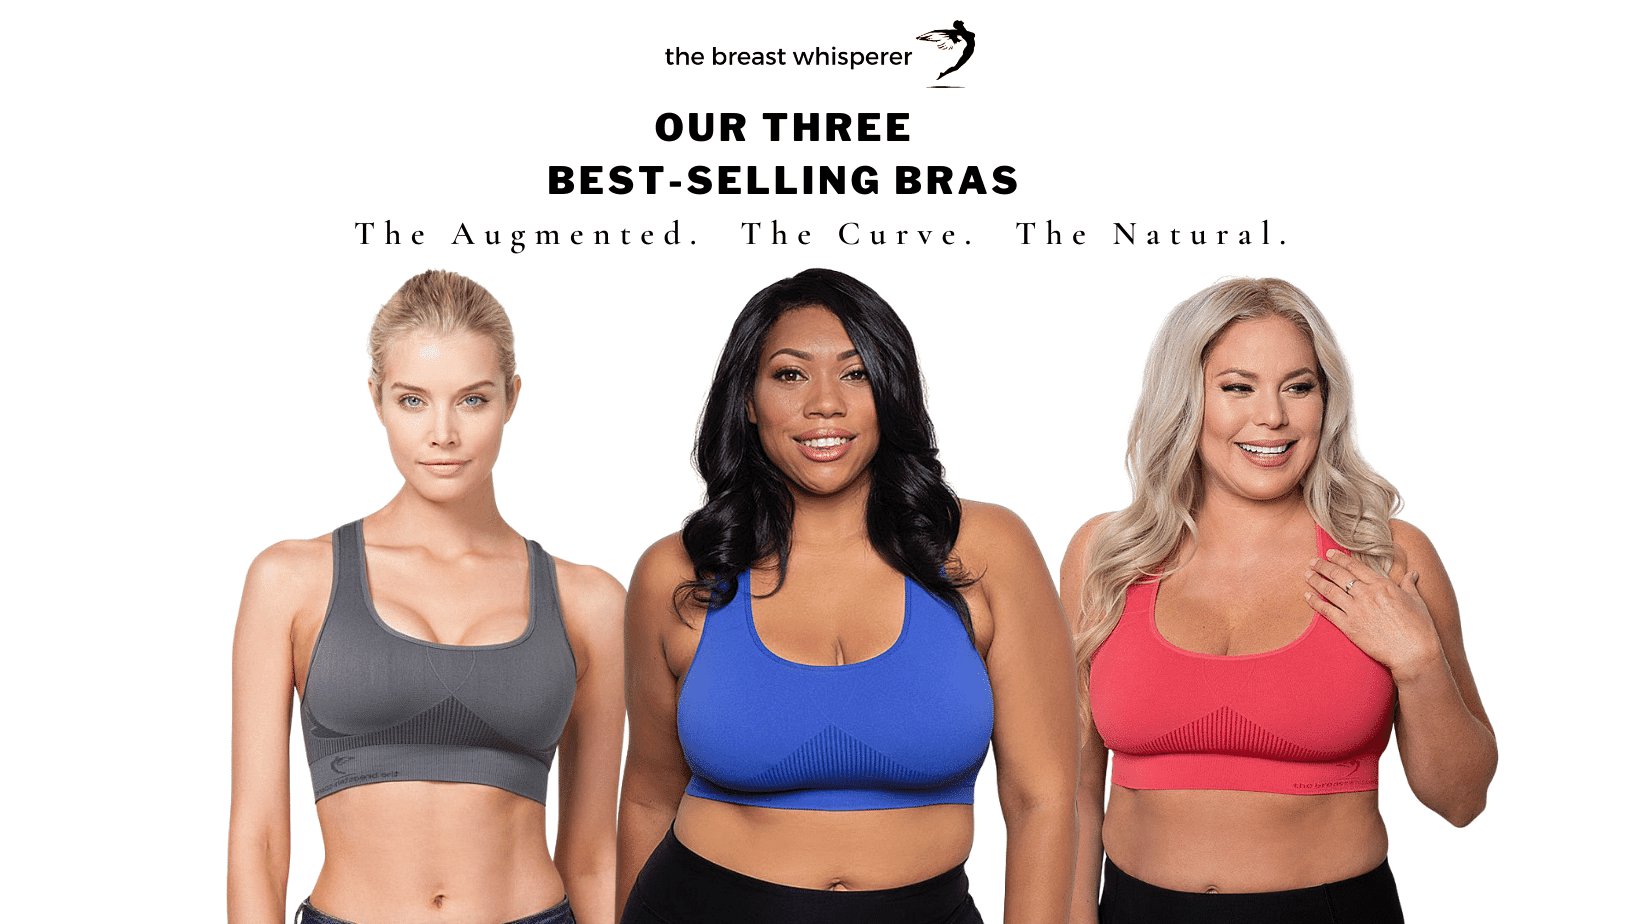 Breast Whisperer Bra best selling bras: The Augmented, The Curve, The Natural